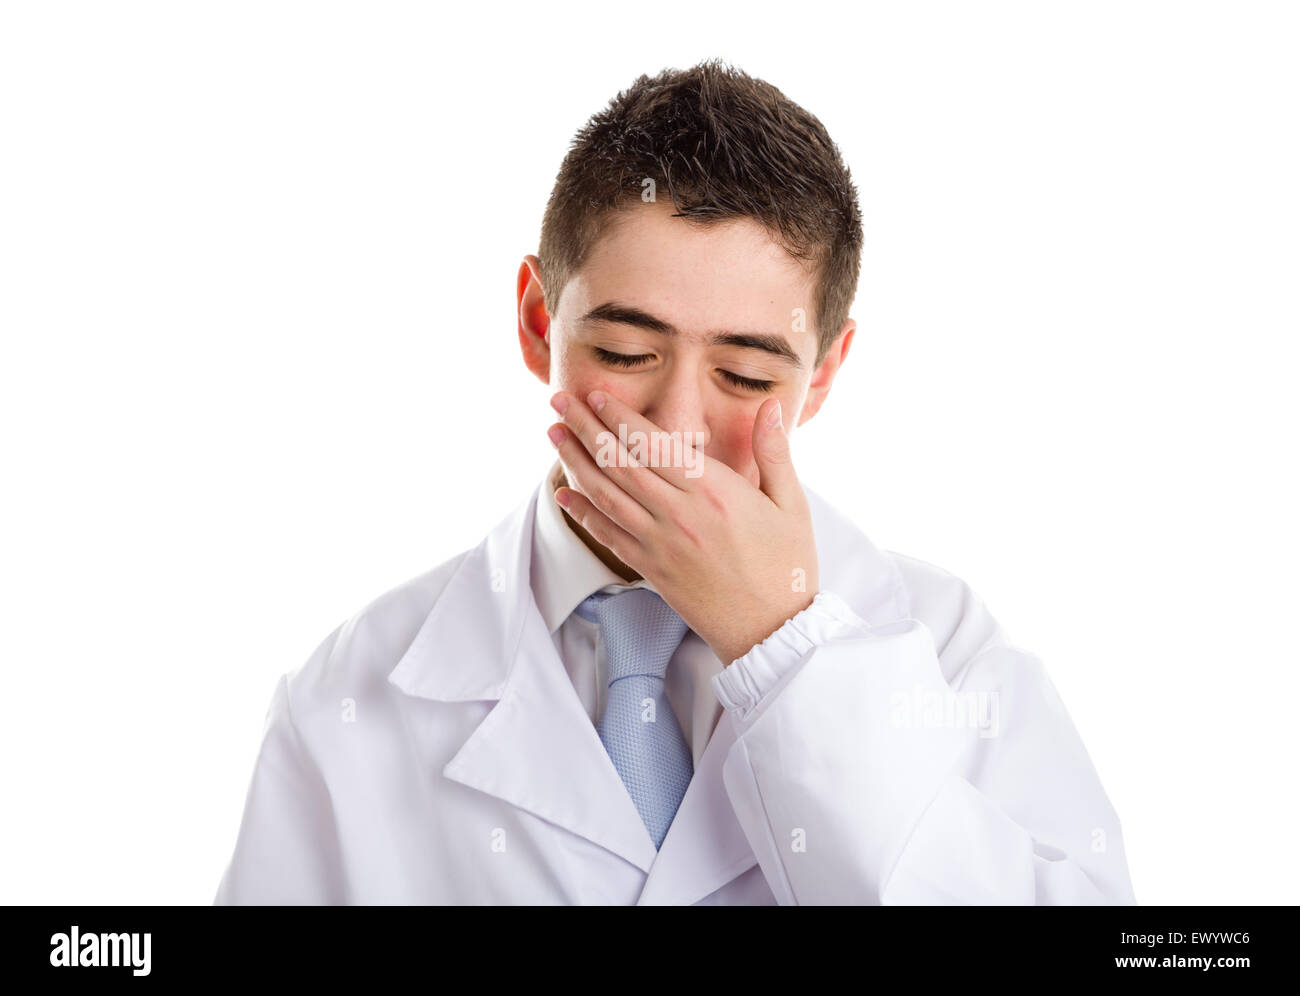 A boy doctor in white coat and blue tie helps to feel medicine more friendly: he is touching his nose. His acne skin has not ben retouched Stock Photo